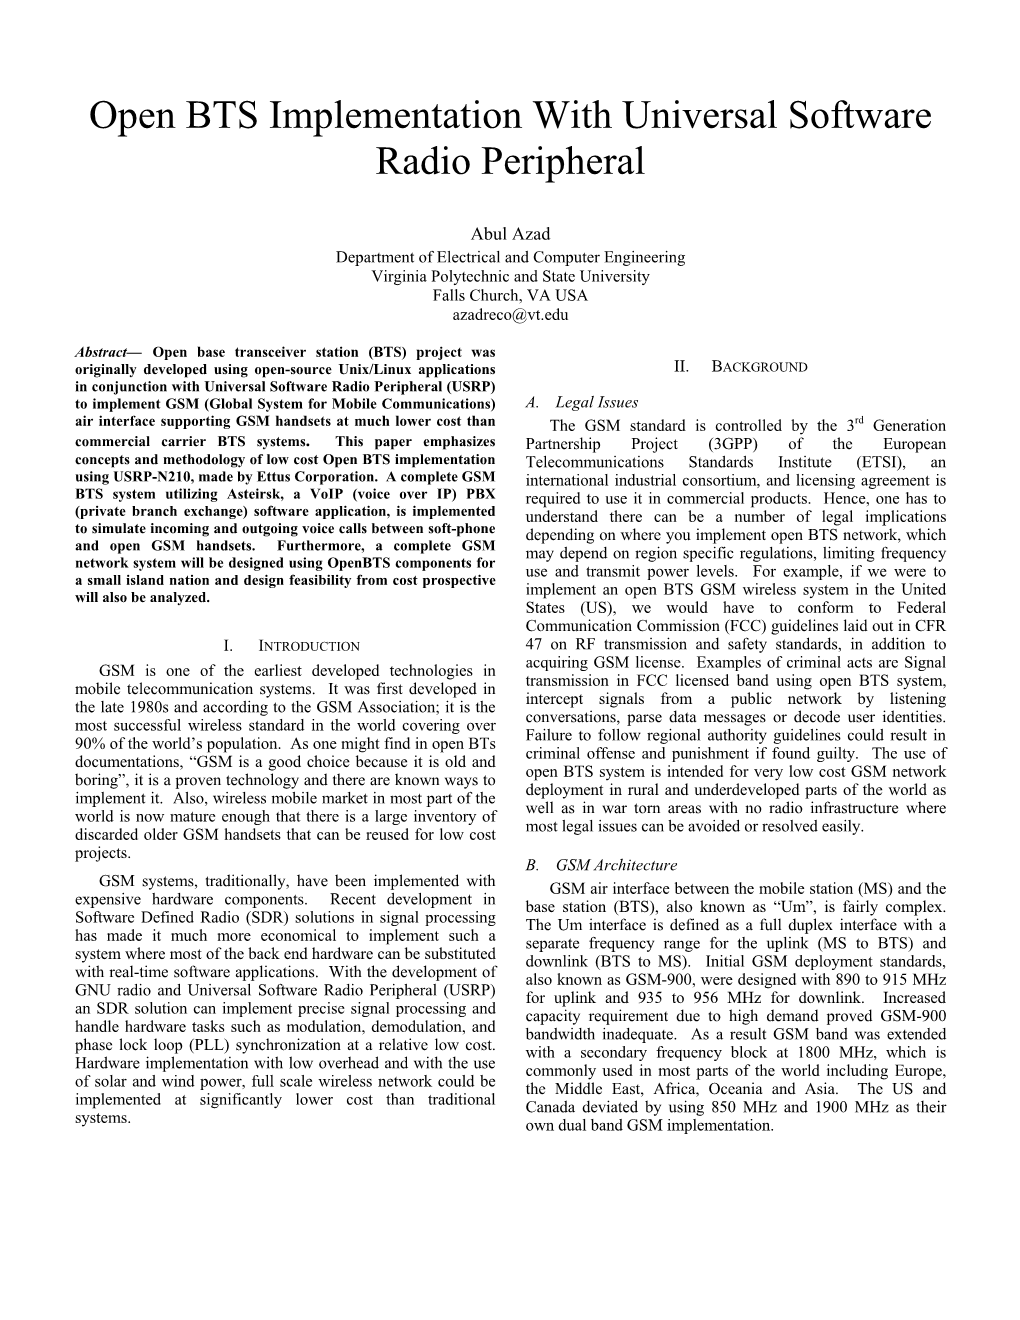 Open BTS Implementation with Universal Software Radio Peripheral